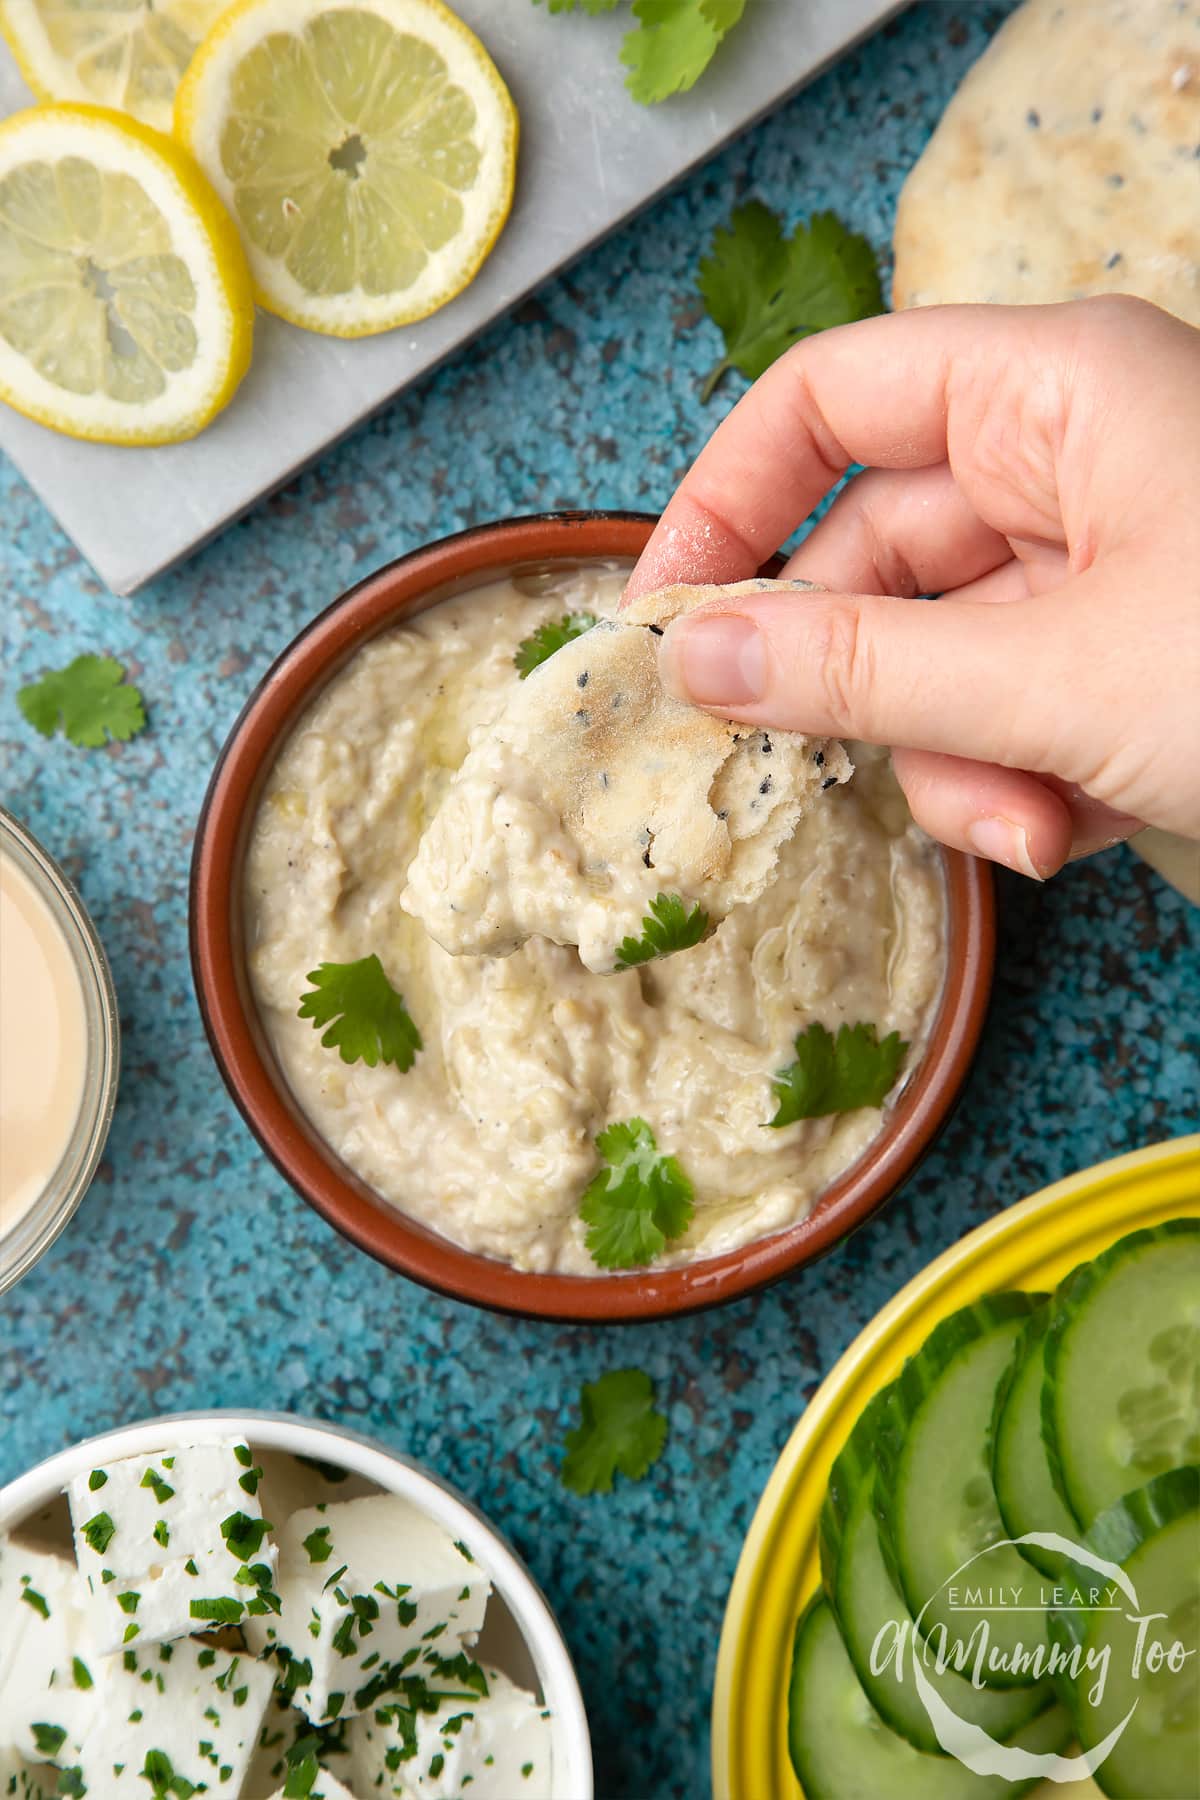 Baba ganoush in a small, shallow teracotta dish. The dip has been garnished with olive oil and parsley leaves. A hand holds a piece of flatbread above the bowl.